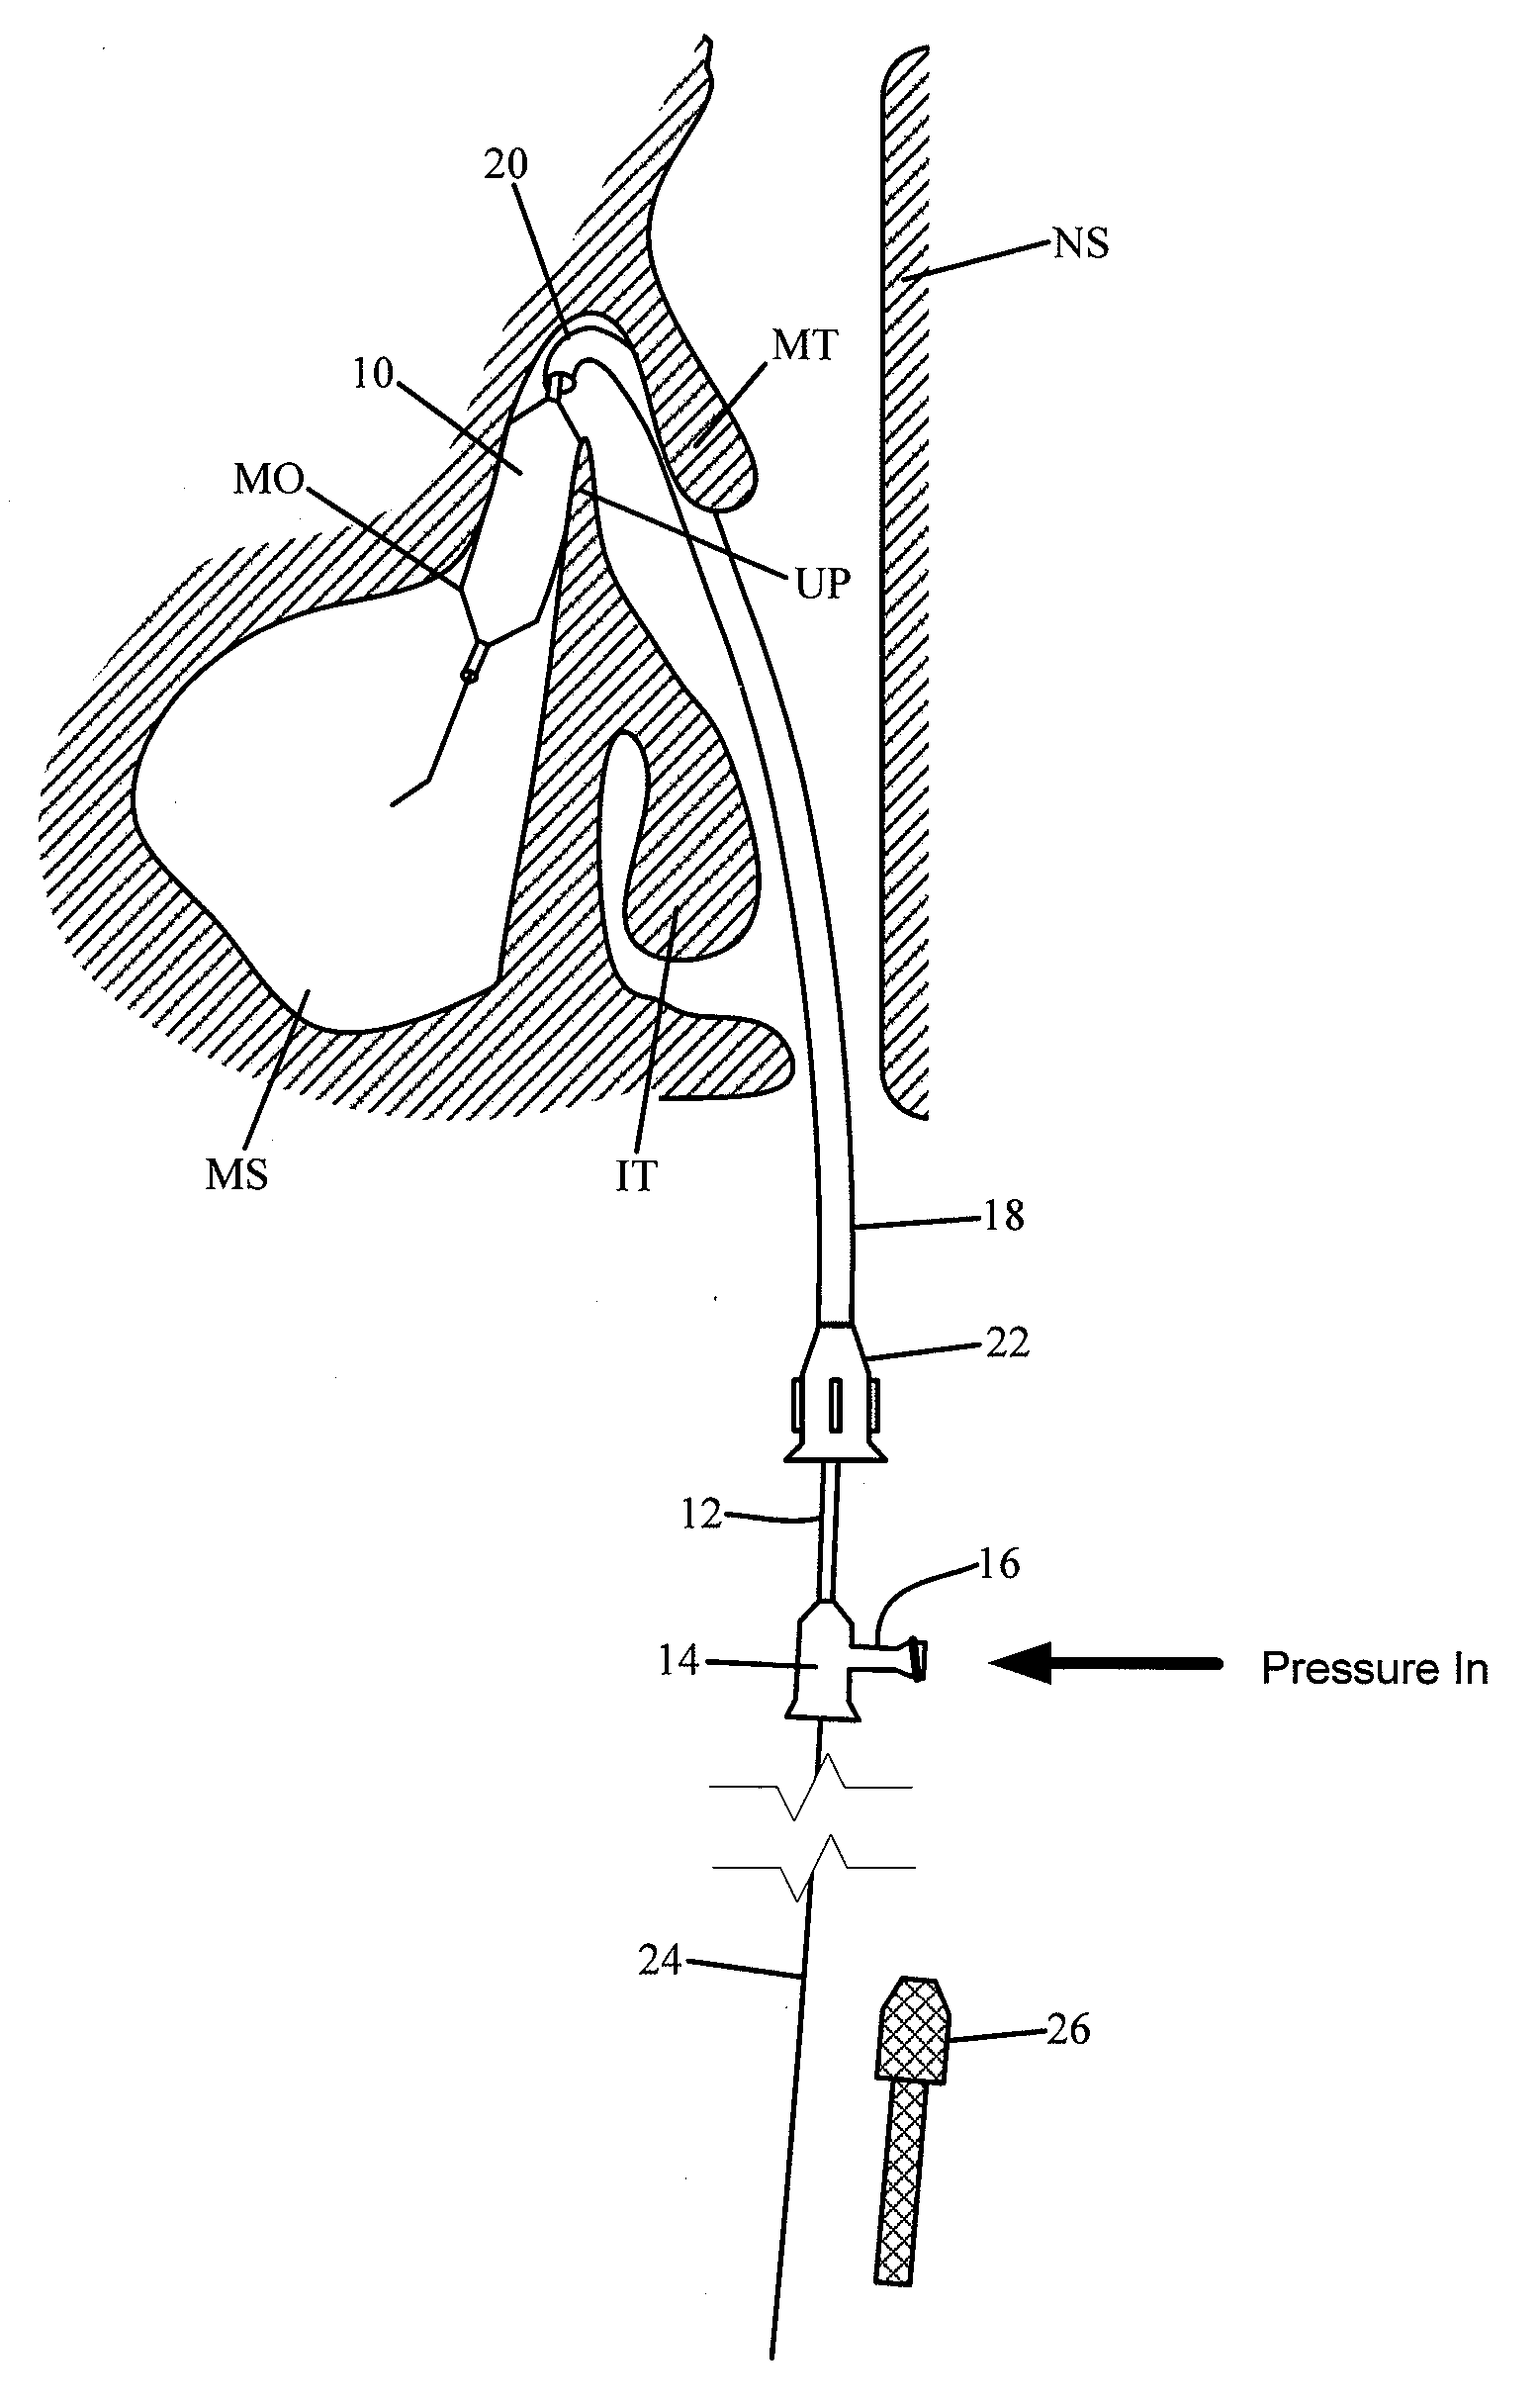 Method for accessing a sinus cavity and related anatomical features